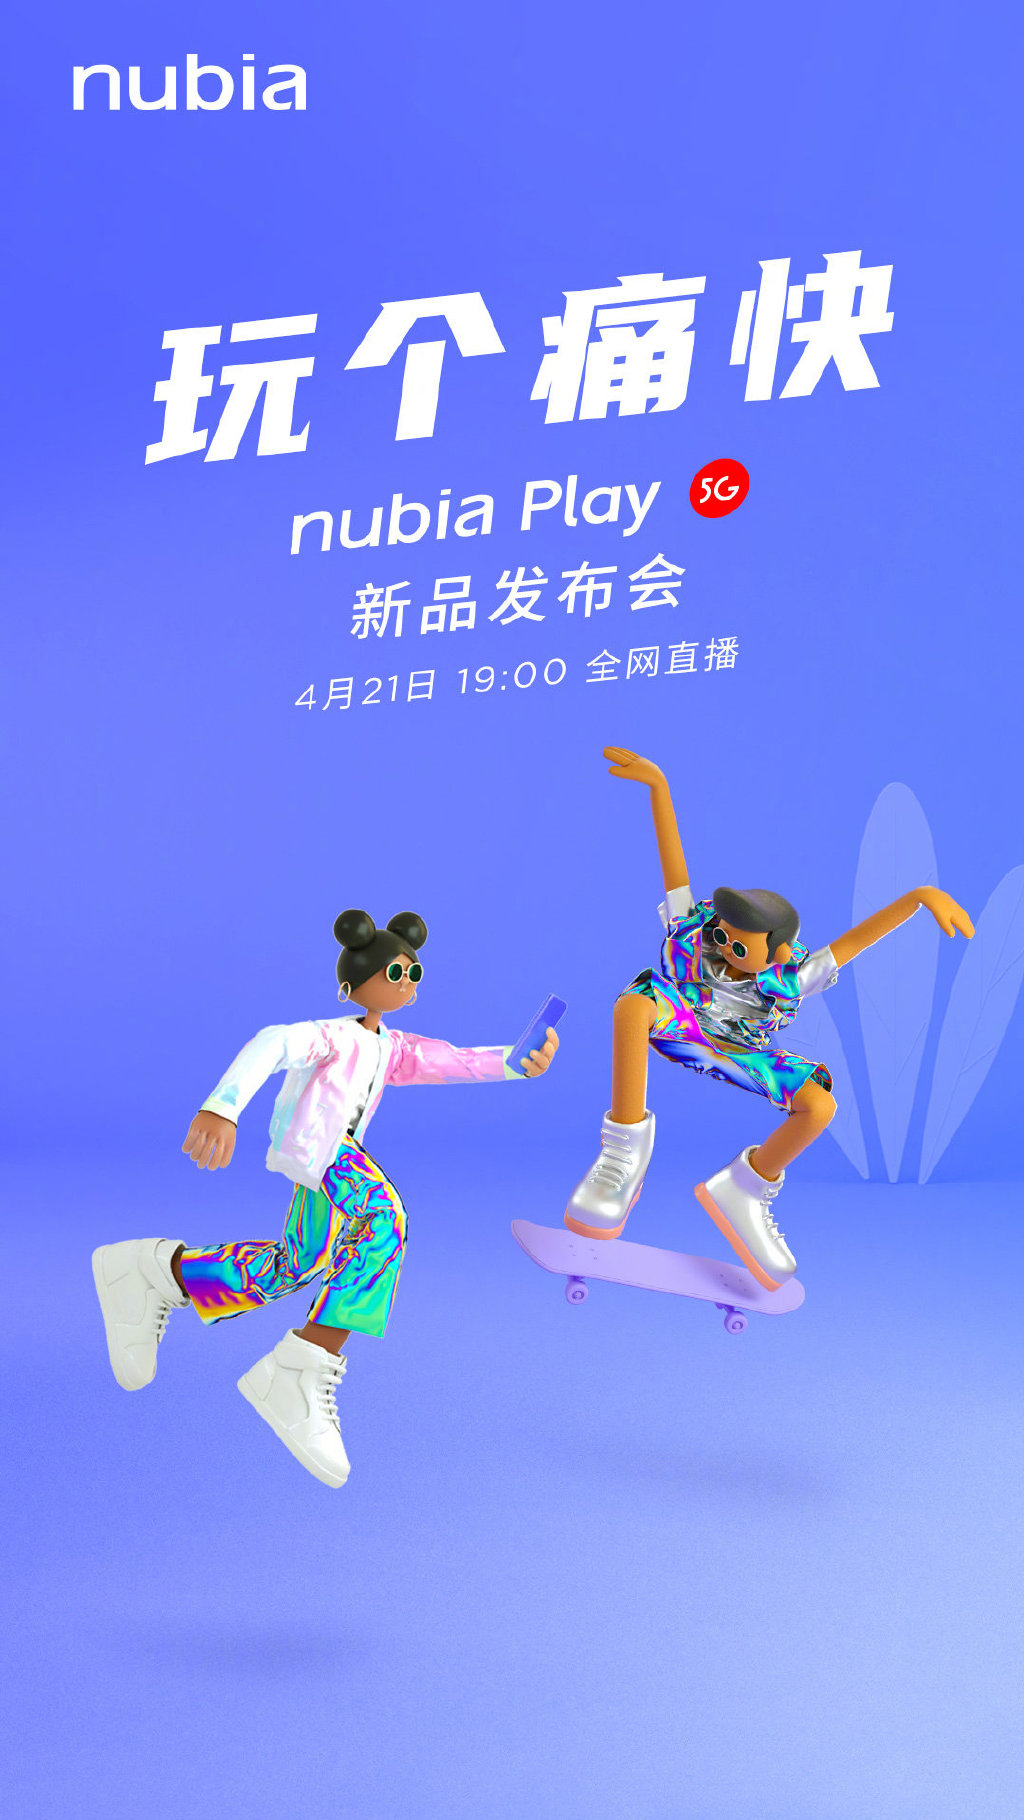 Nubia Play Poster